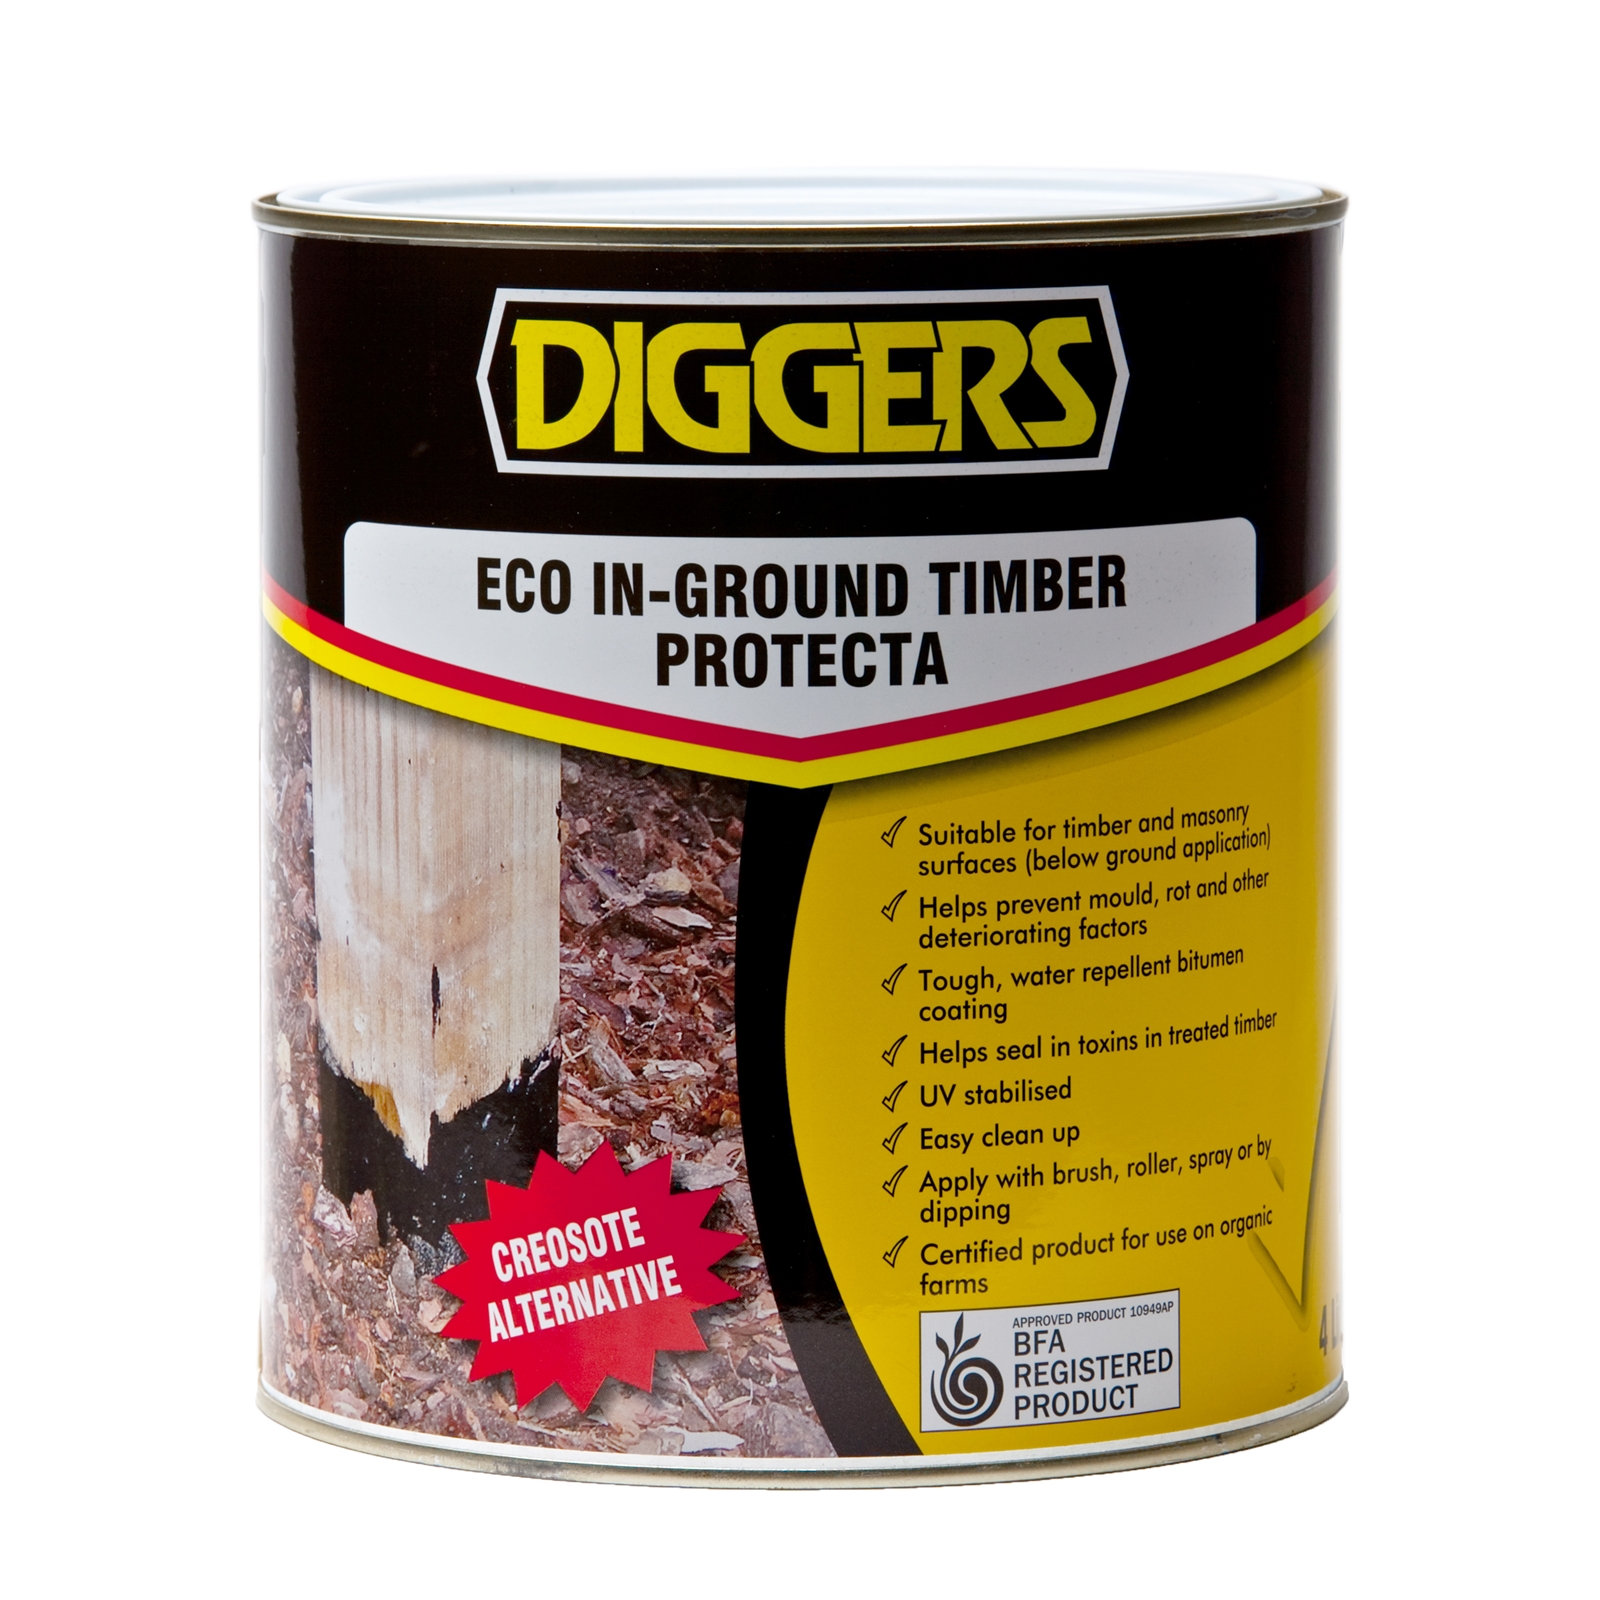 Diggers 4L Eco In-Ground Timber Protecta